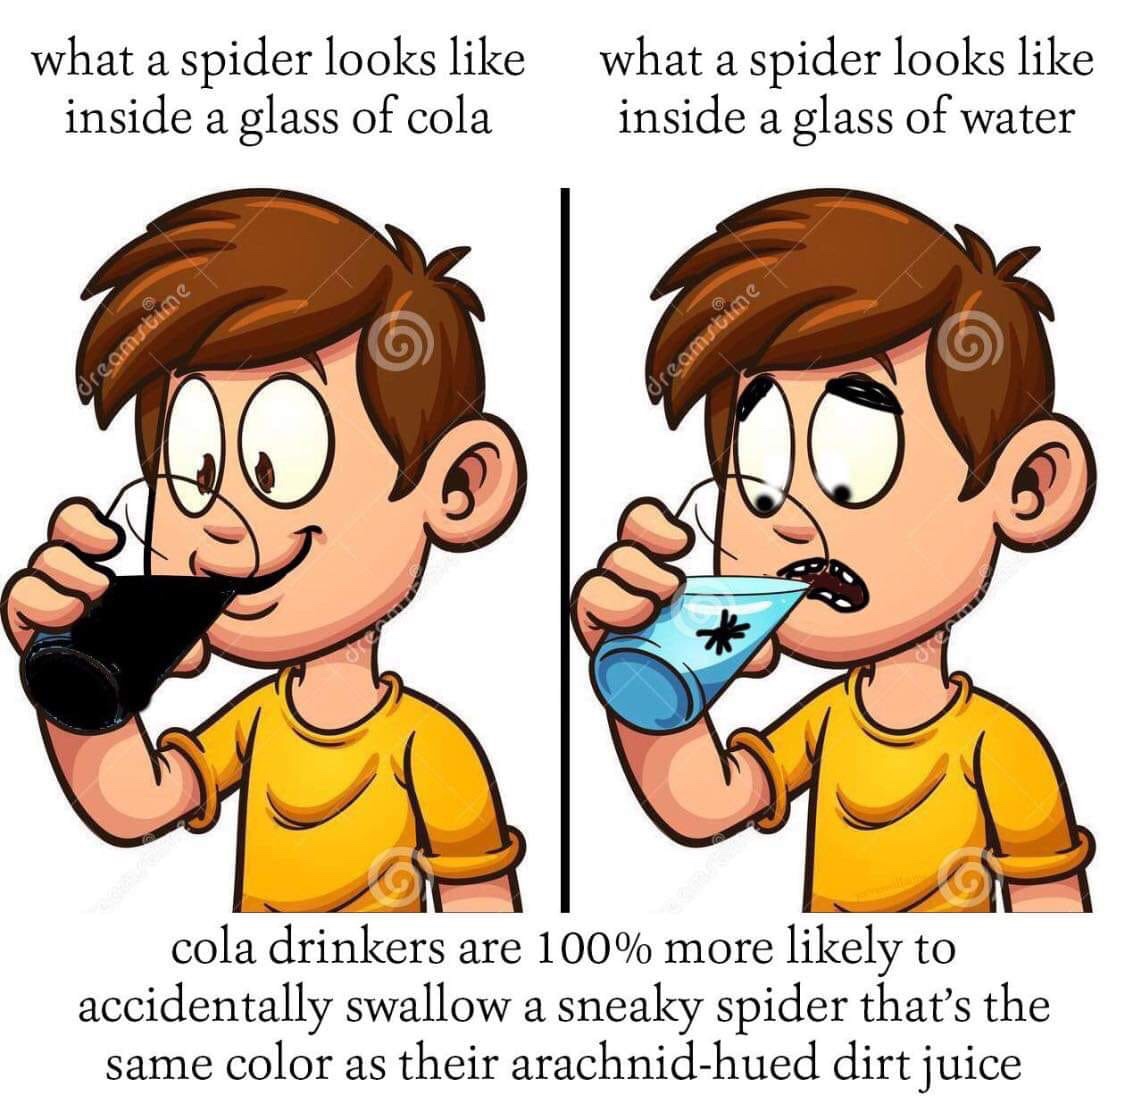 reddit r makemesuffer - what a spider looks inside a glass of cola what a spider looks inside a glass of water dreamstime dreamstime cola drinkers are 100% more ly to accidentally swallow a sneaky spider that's the same color as their arachnidhued dirt ju